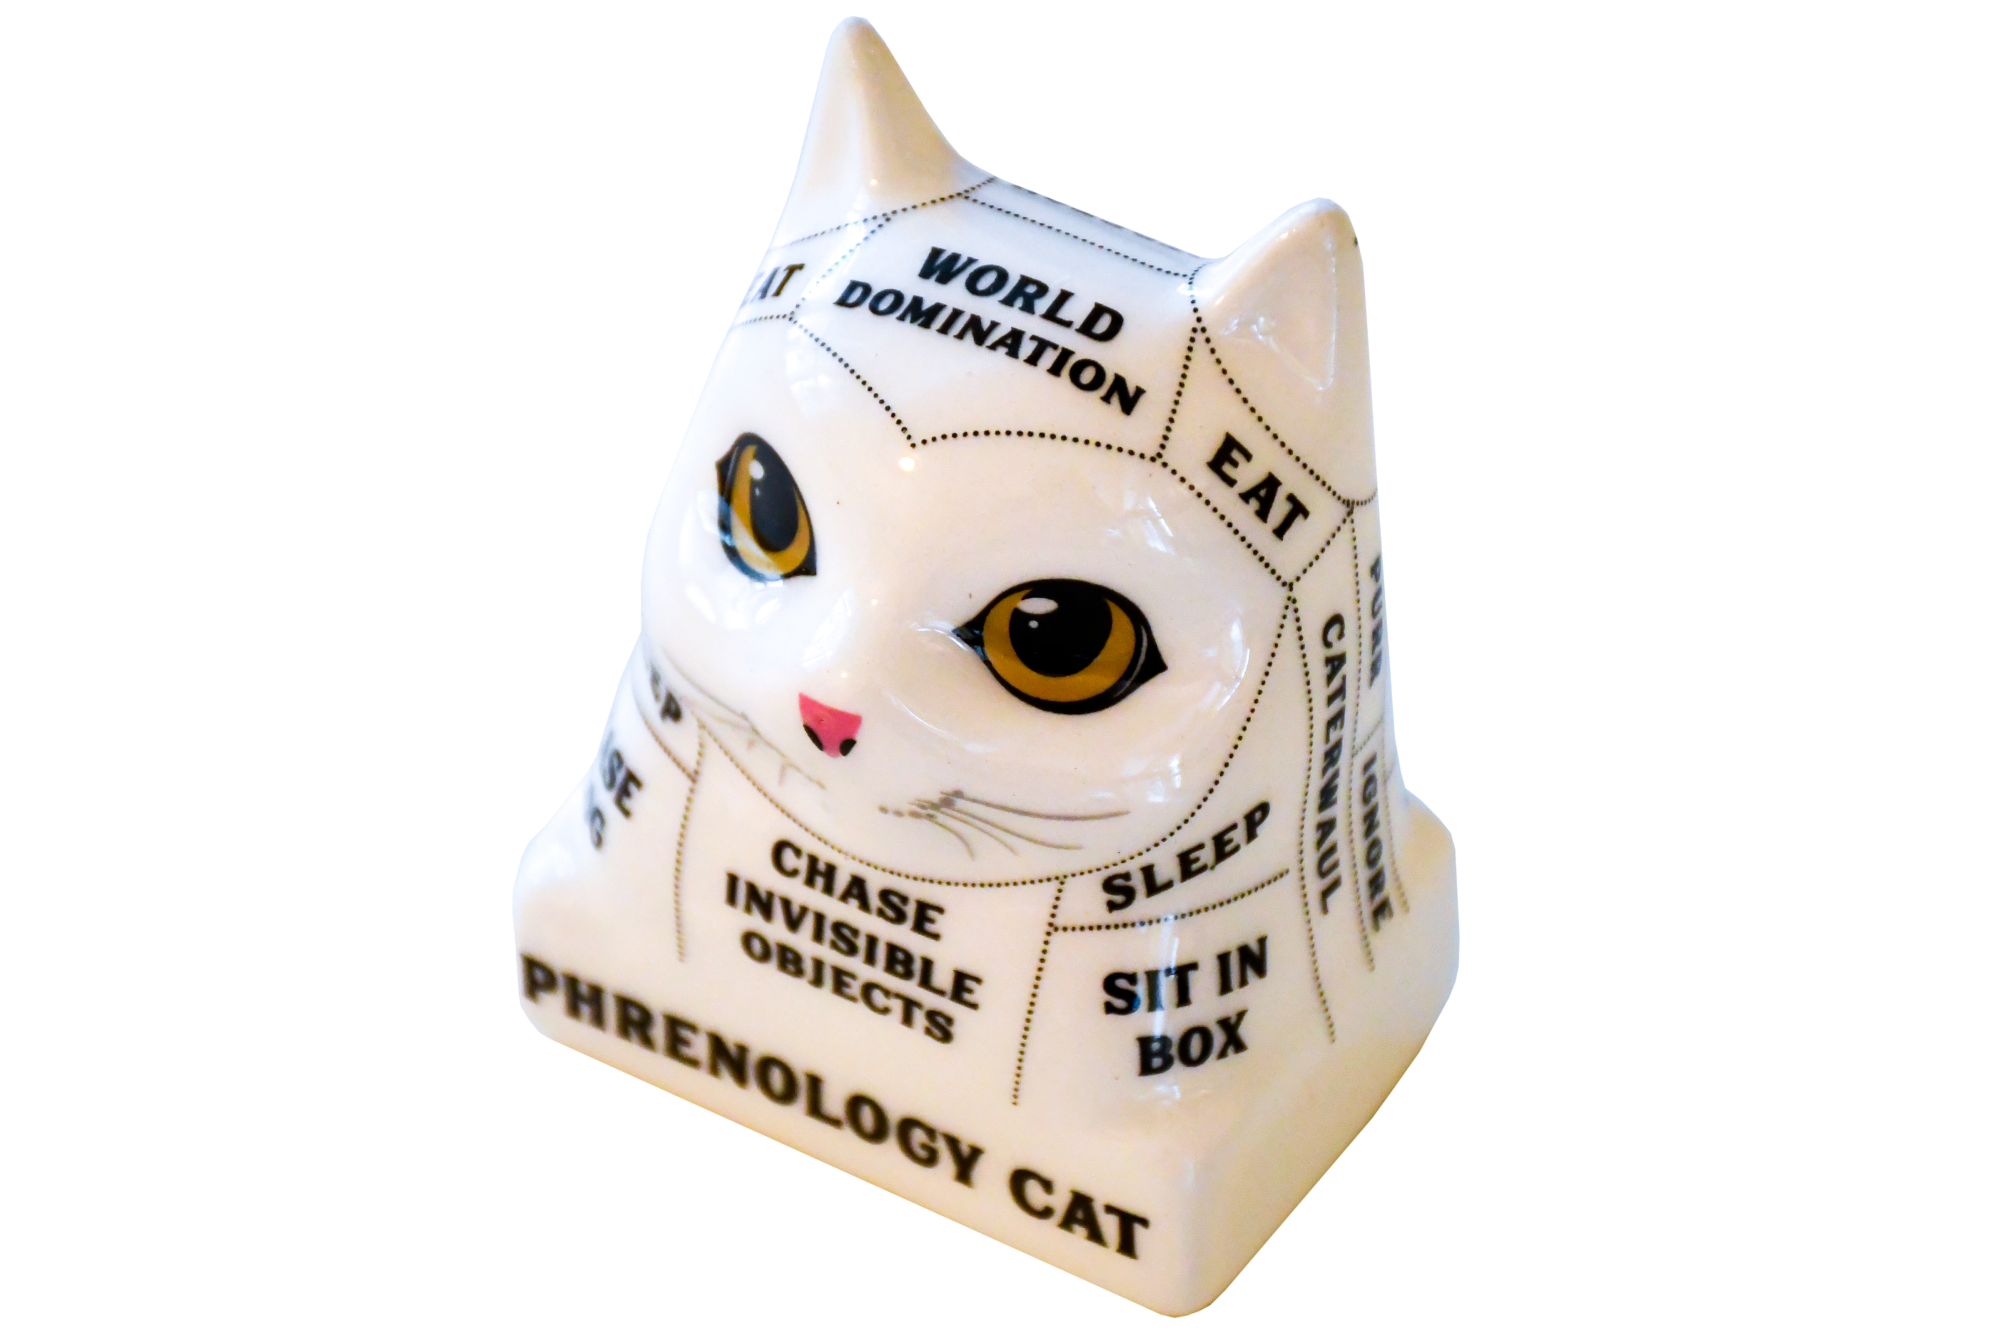 A ceramic cat head with lines dividing it into sections labeled with words such as "eat" and "chase invisible objects"